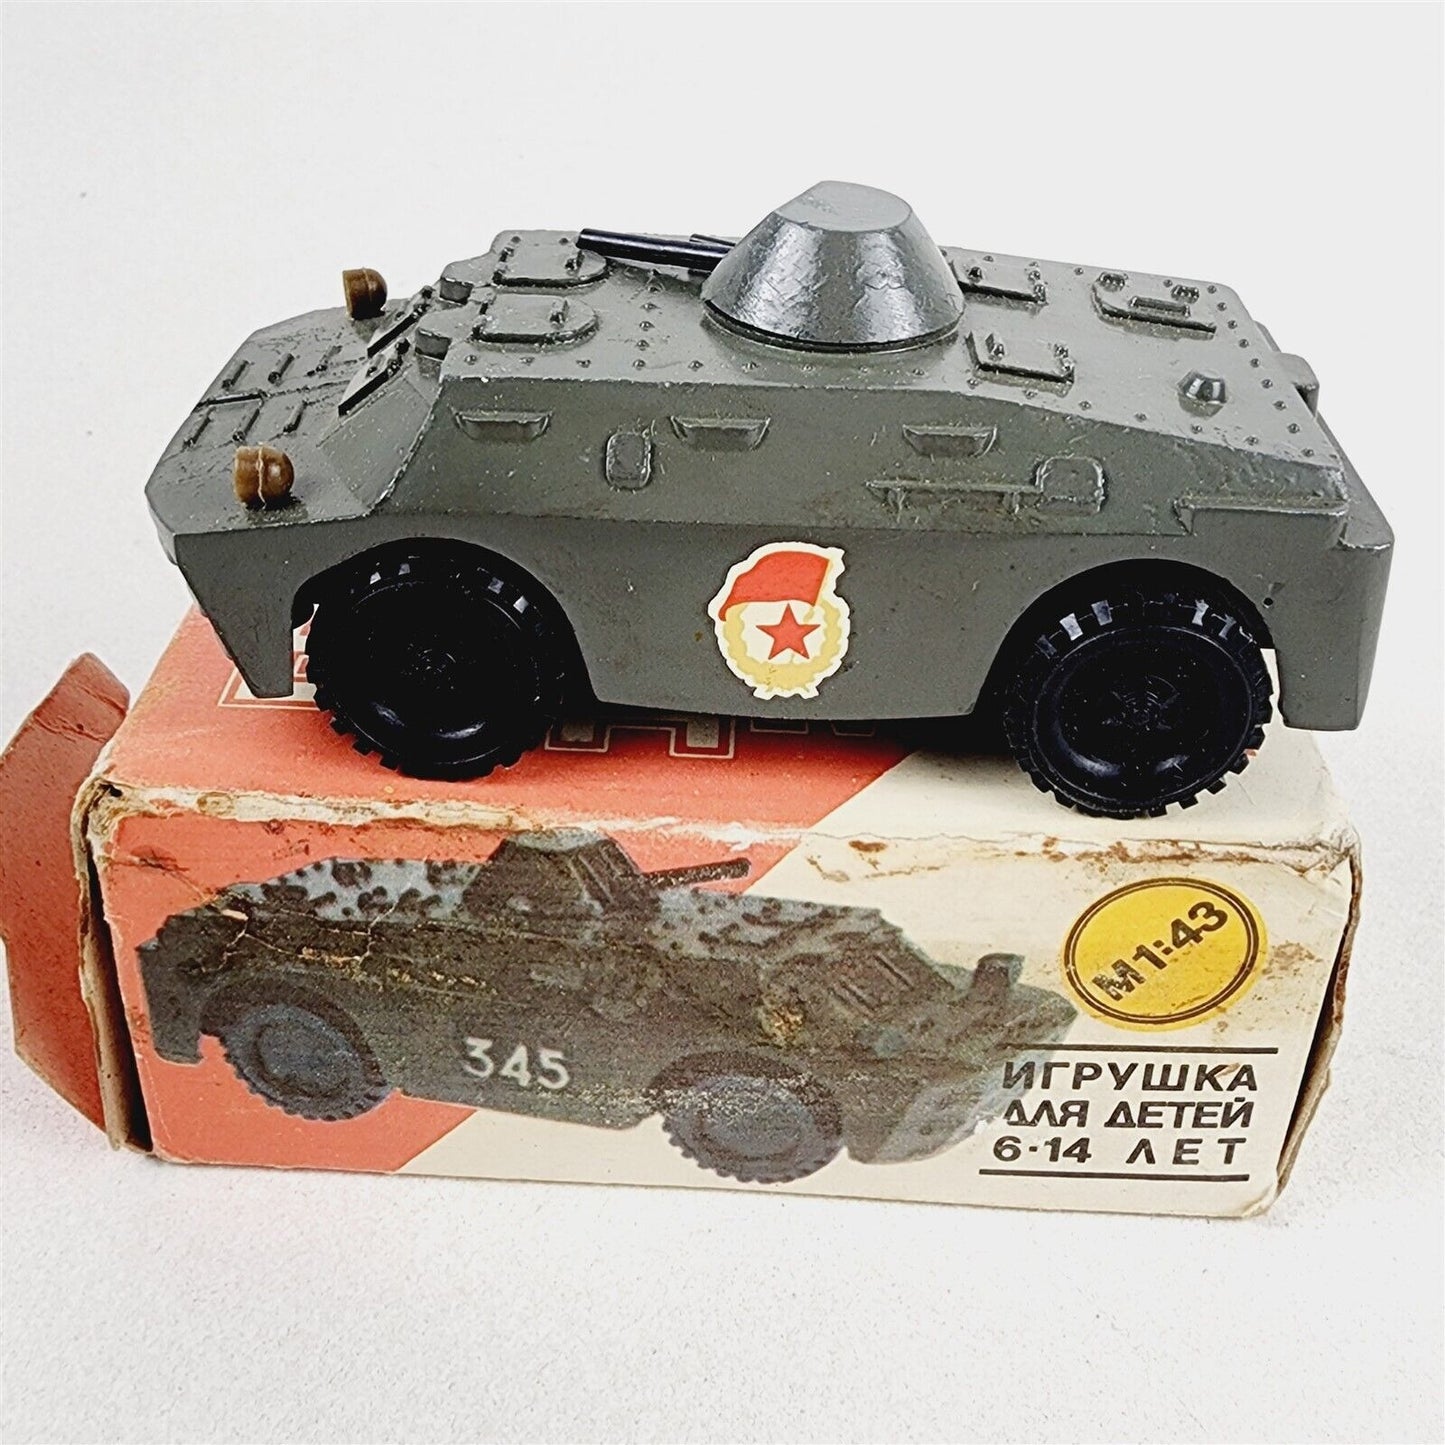 Vintage Russian 6PAM-2 Military Tank Toy Metal in Original Box M1:43 Scale